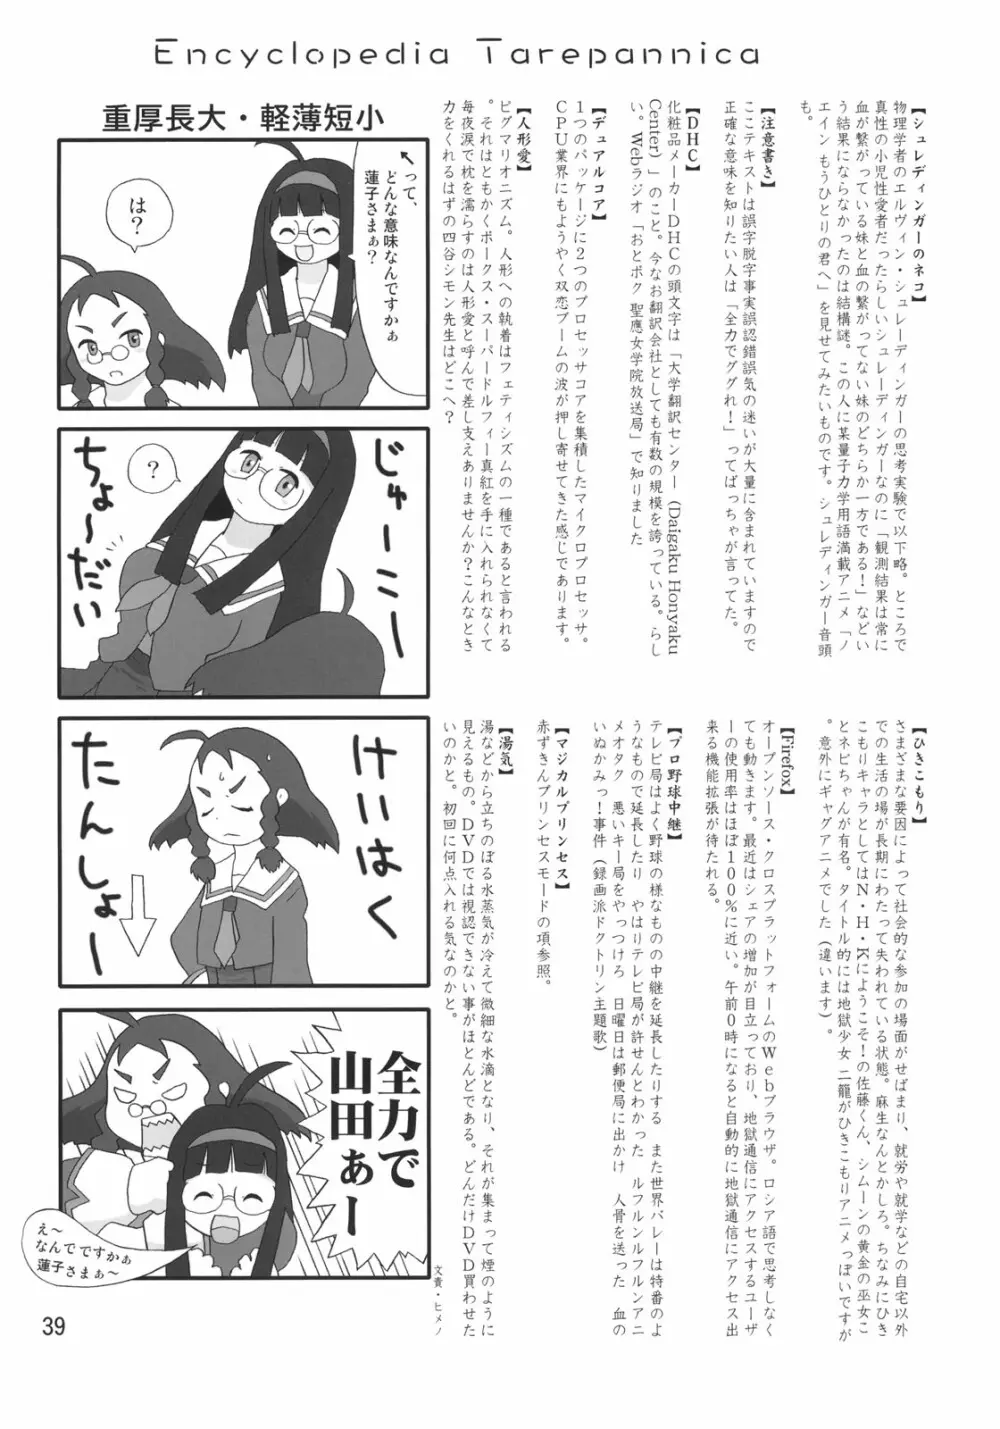 (C71) [むてけいファイヤー (よろず)] 世界うきうき大図鑑2006 - The Pictorial Guide of the 'Uki-Uki' in the World 2006 (よろず) Page.38